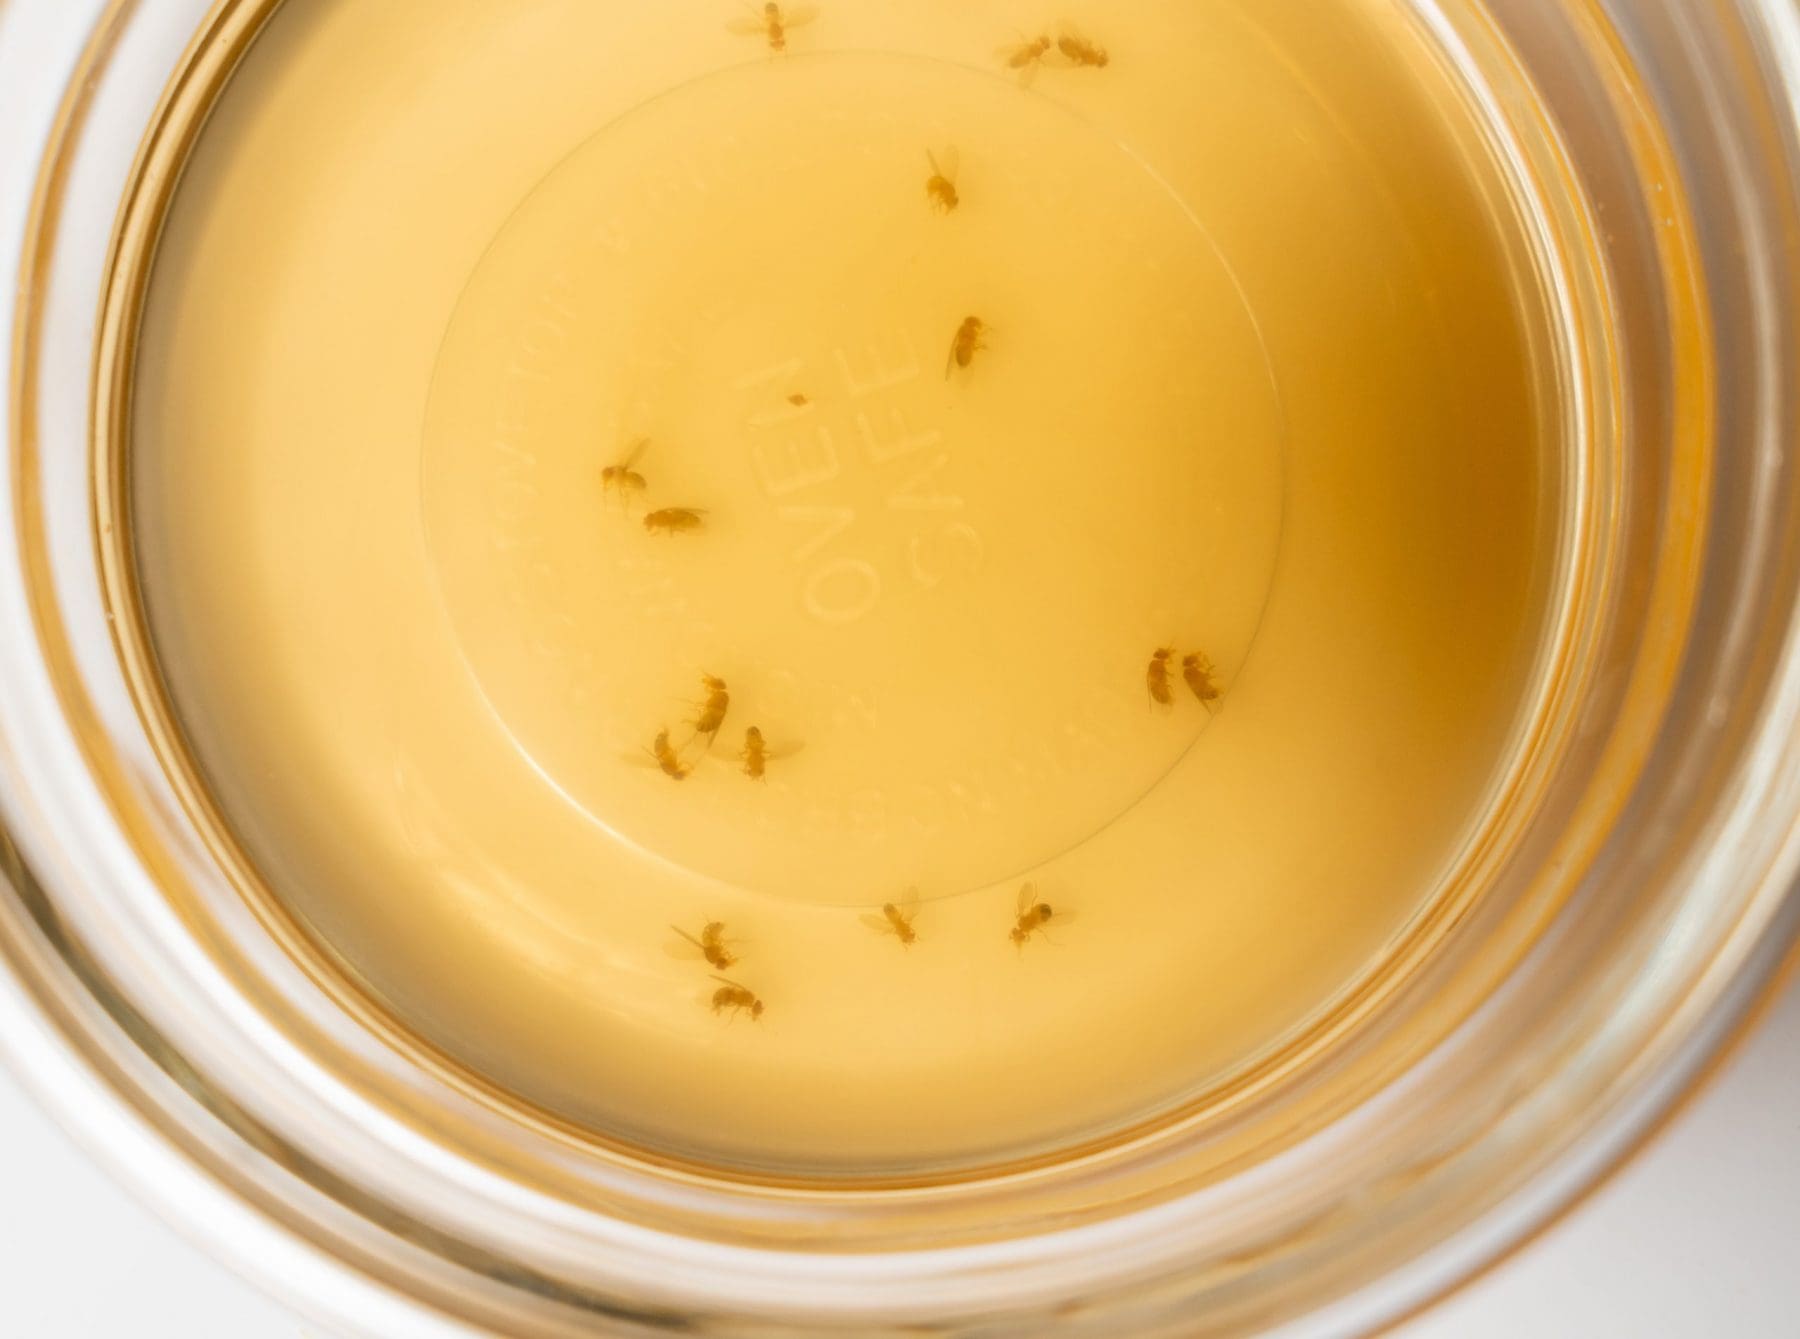 Home remedy for catching fruit flies and small insects with glass bowl of cider vinegar and drop of detergent